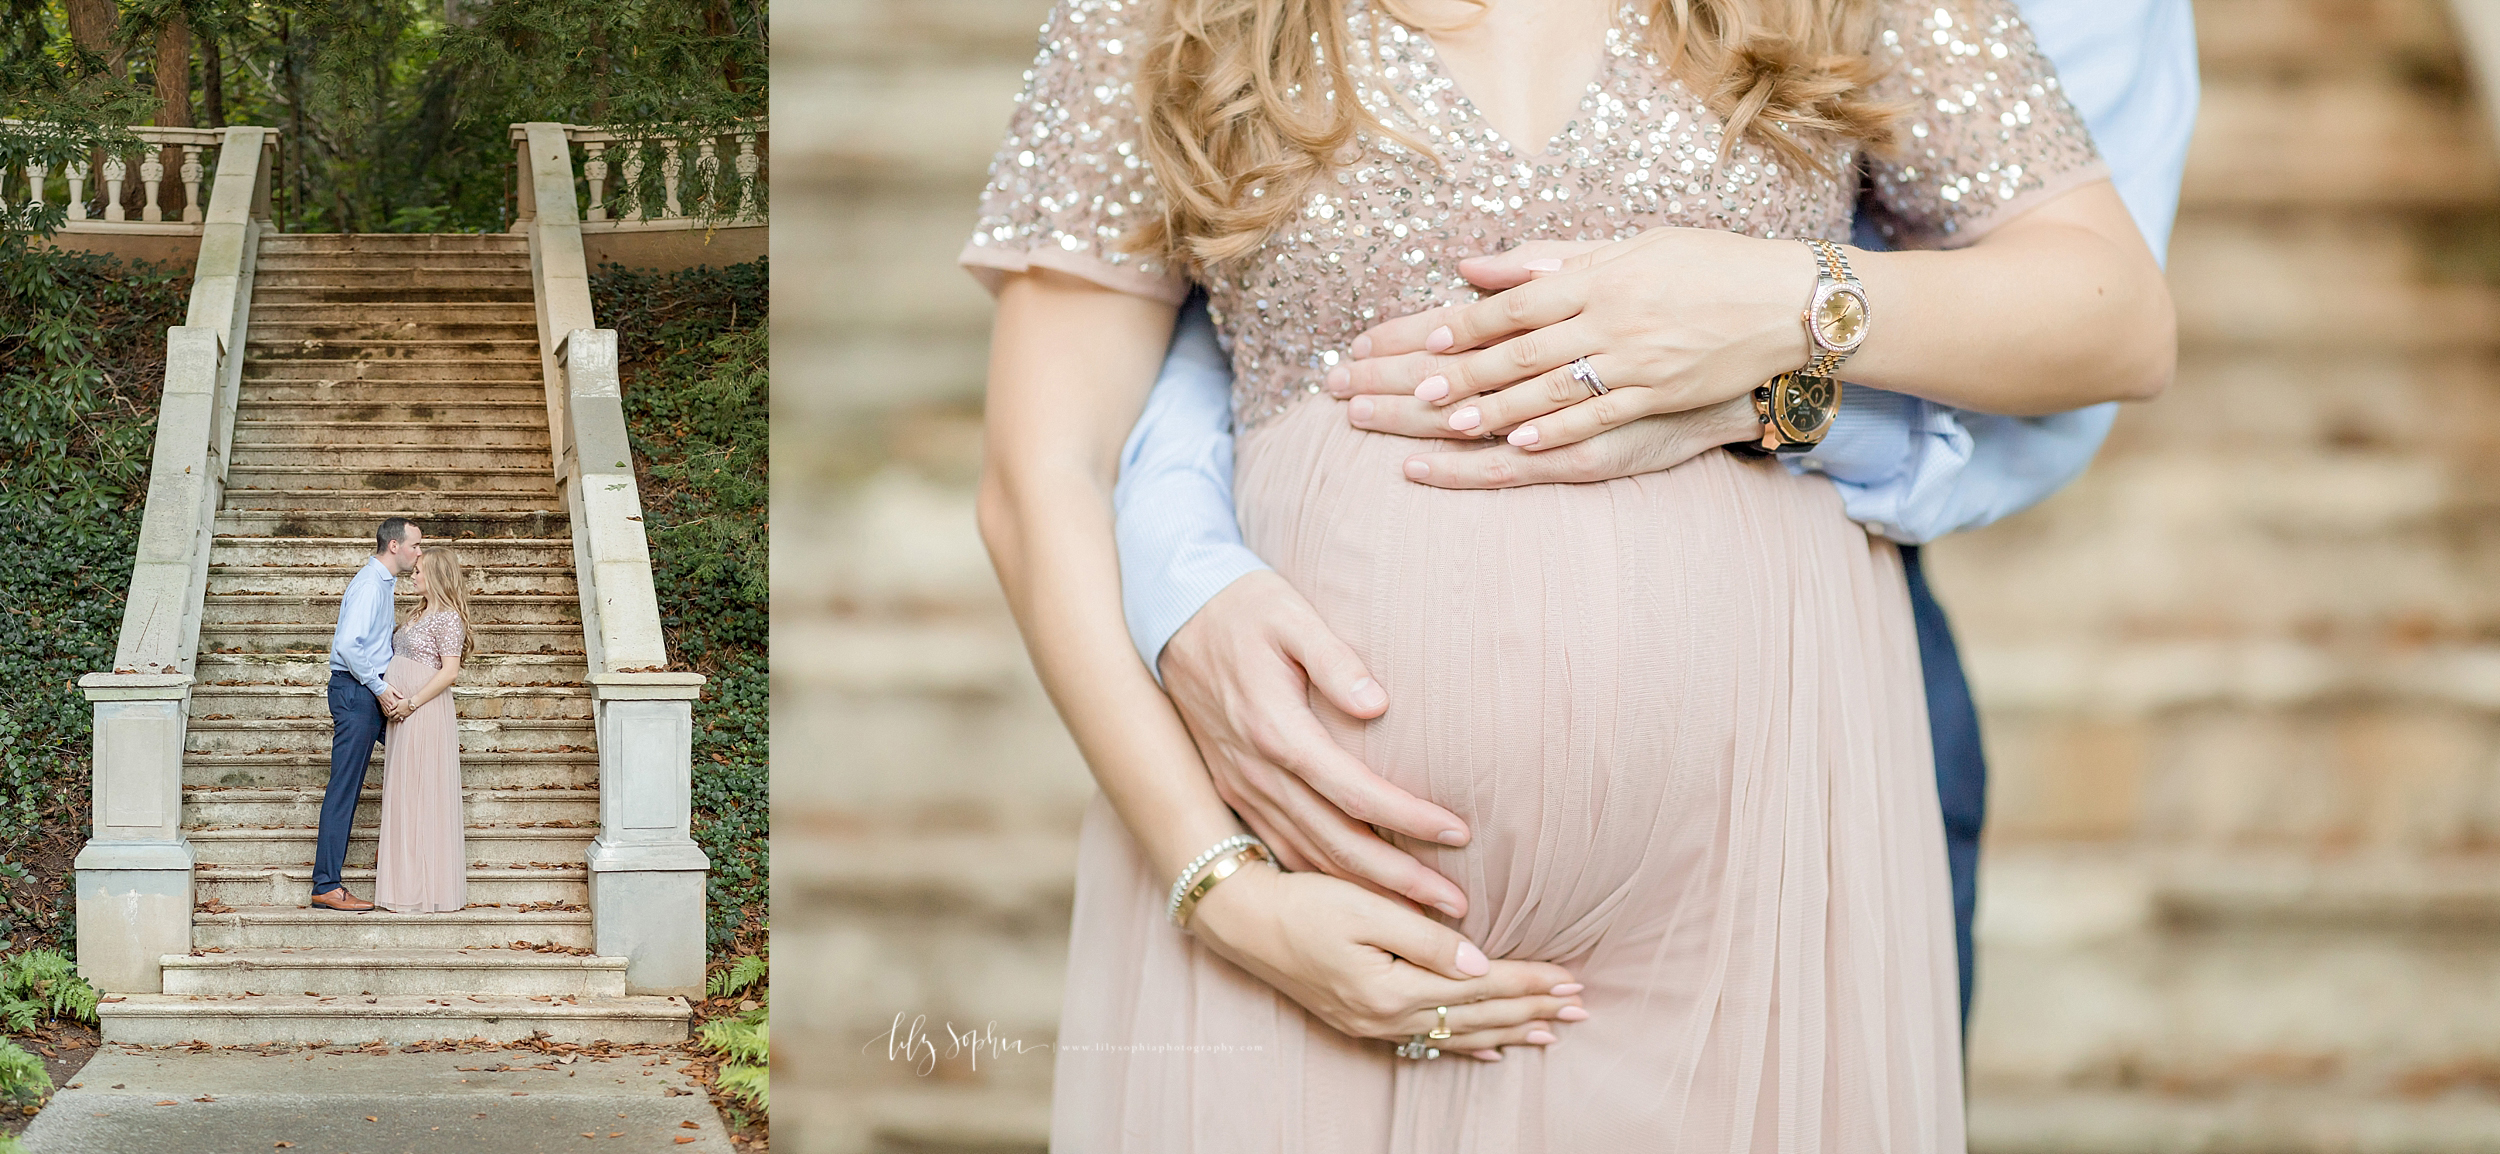 atlanta-buckhead-brookhaven-inman-decatur-lily-sophia-photography-maternity-pregnancy-photographer-portraits-studio-grant-park-intown-couple-russian-expecting-baby-boy-outdoors-gardens-sunset-fall_0664.jpg